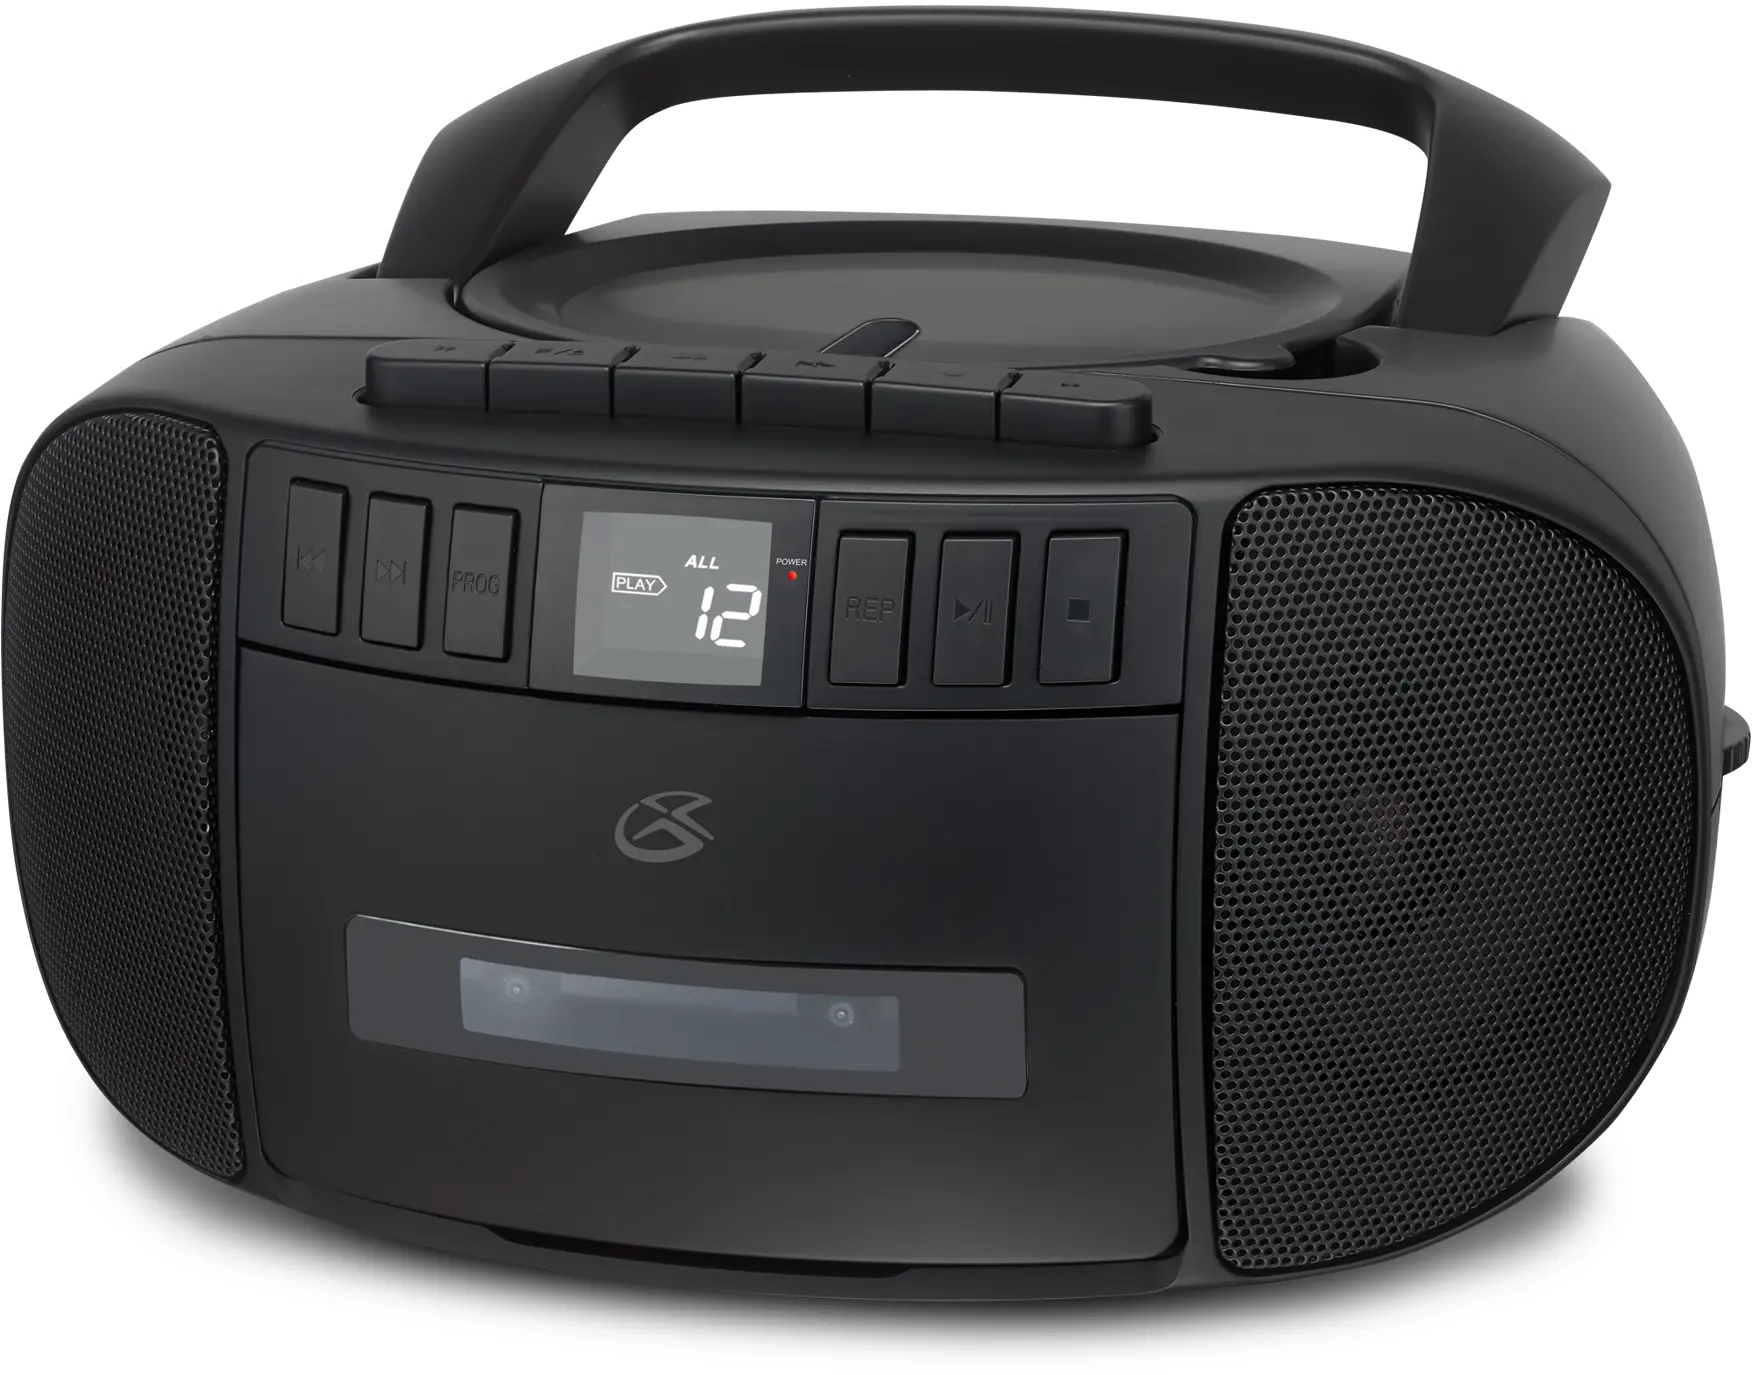 GPX Boombox with CD, Cassette and AM/FM Radio - Black